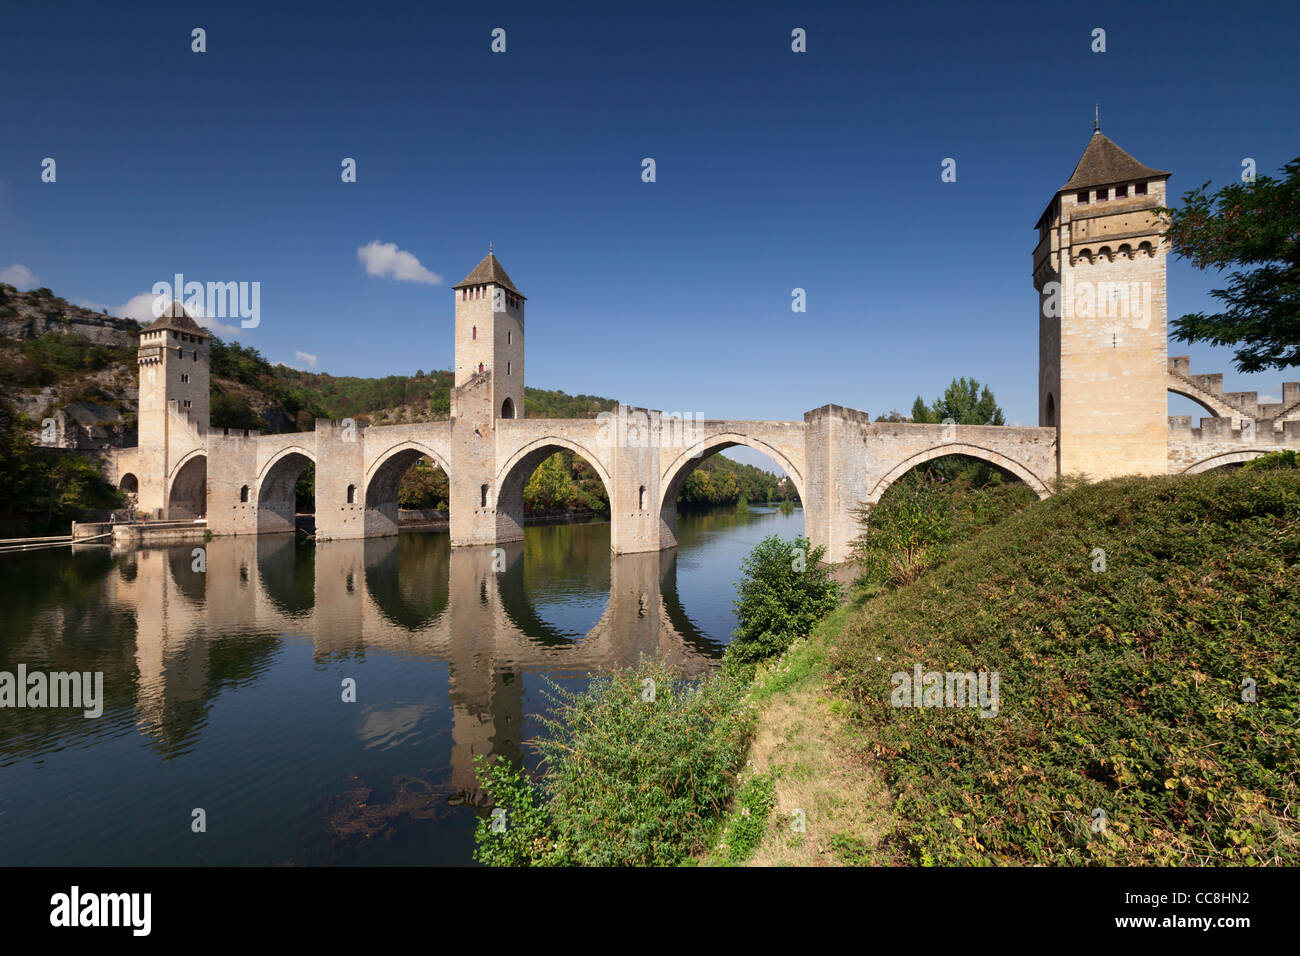 The Pont Valentre, symbol of the city of Cahors, crossing the River Lot. Stock Photo